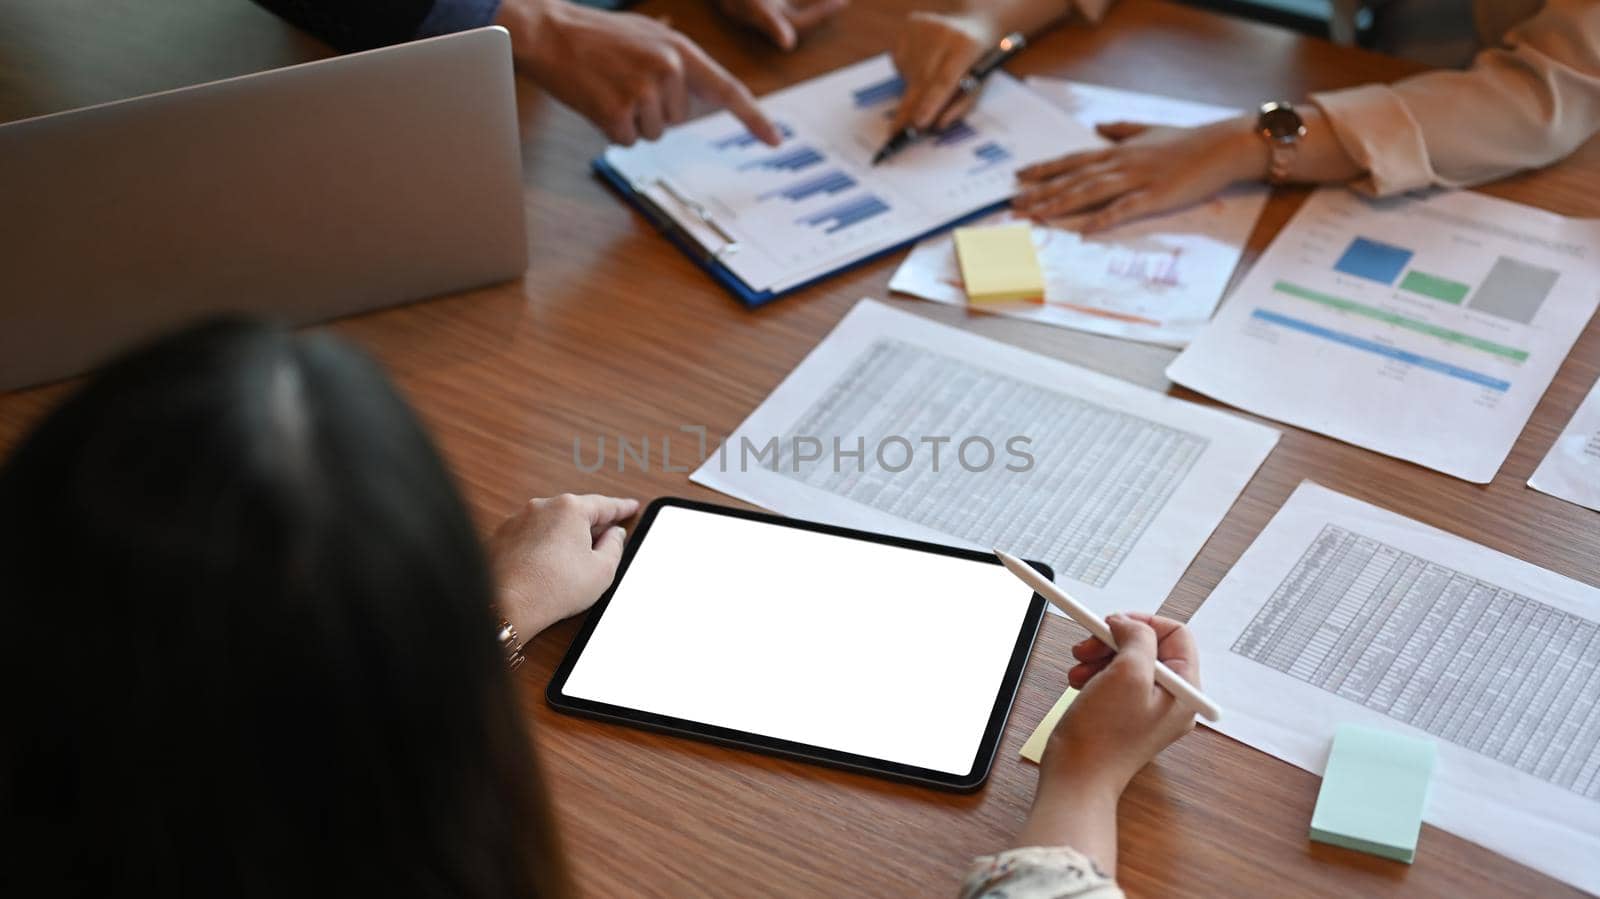 Group of successful businesspeople analyzing financial documents together.